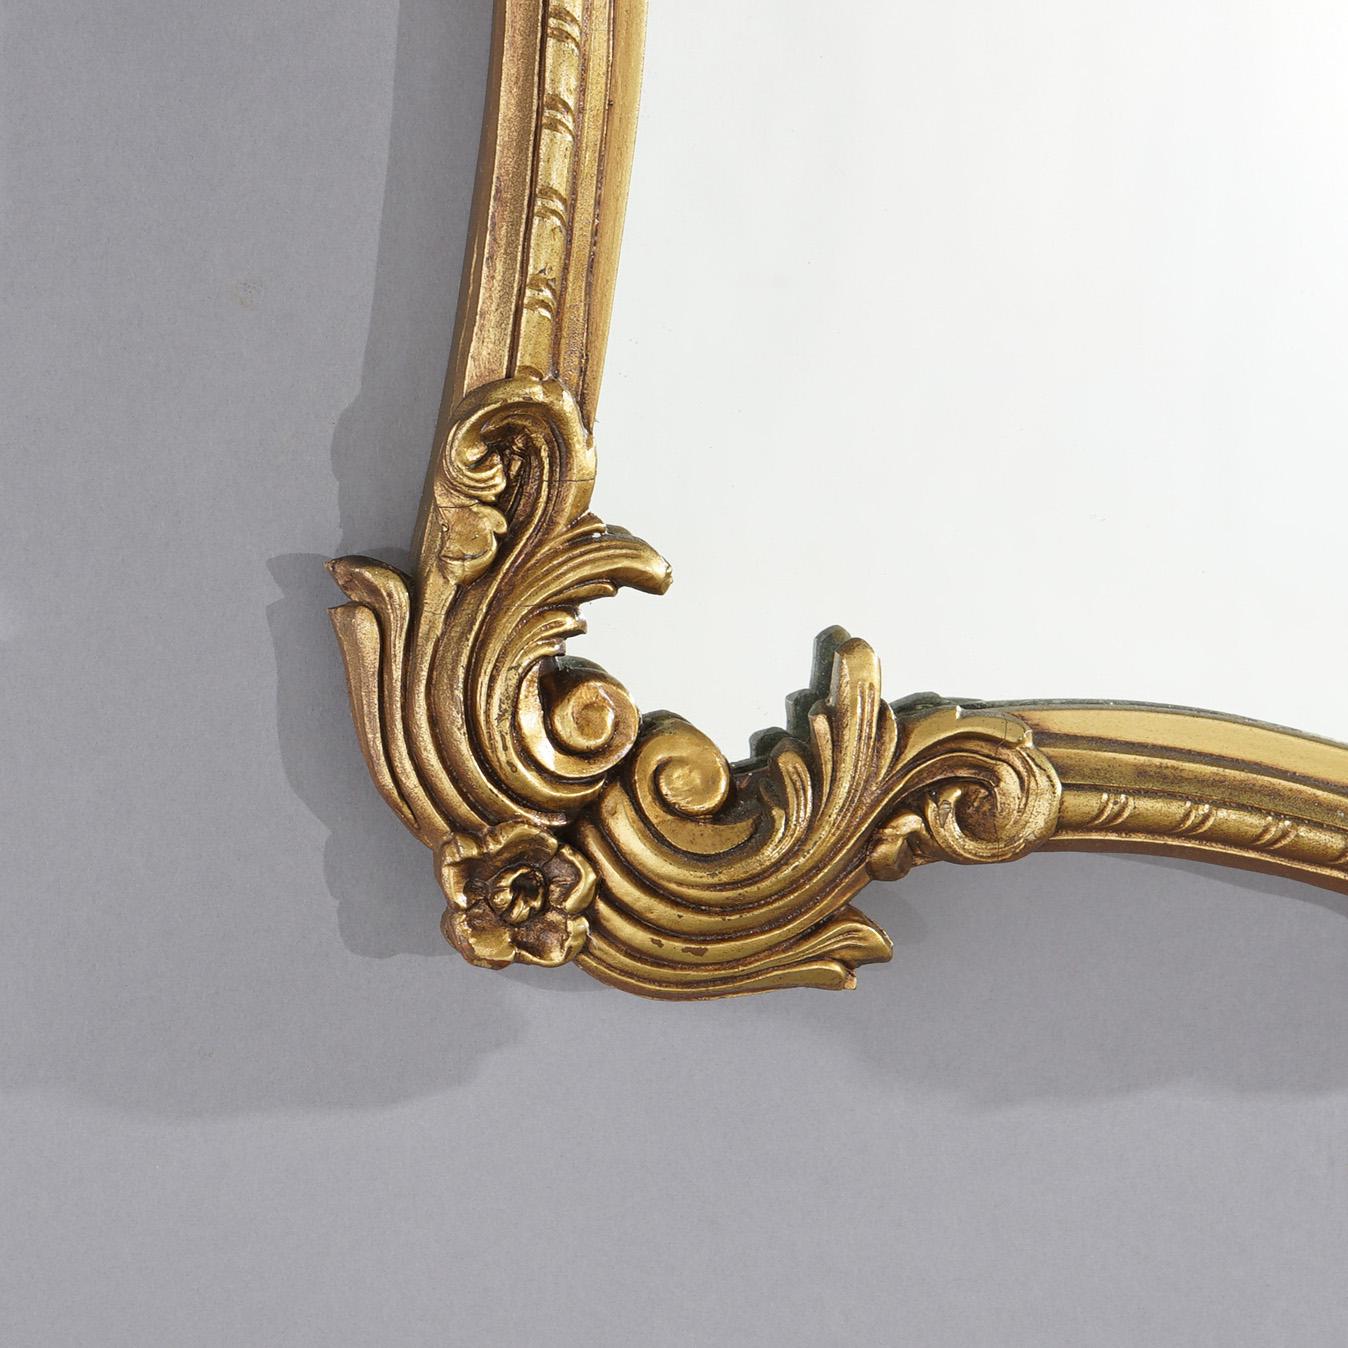 Antique French Giltwood Wall Mirror with Foliate & Gadroon Elements Circa 1930 For Sale 2